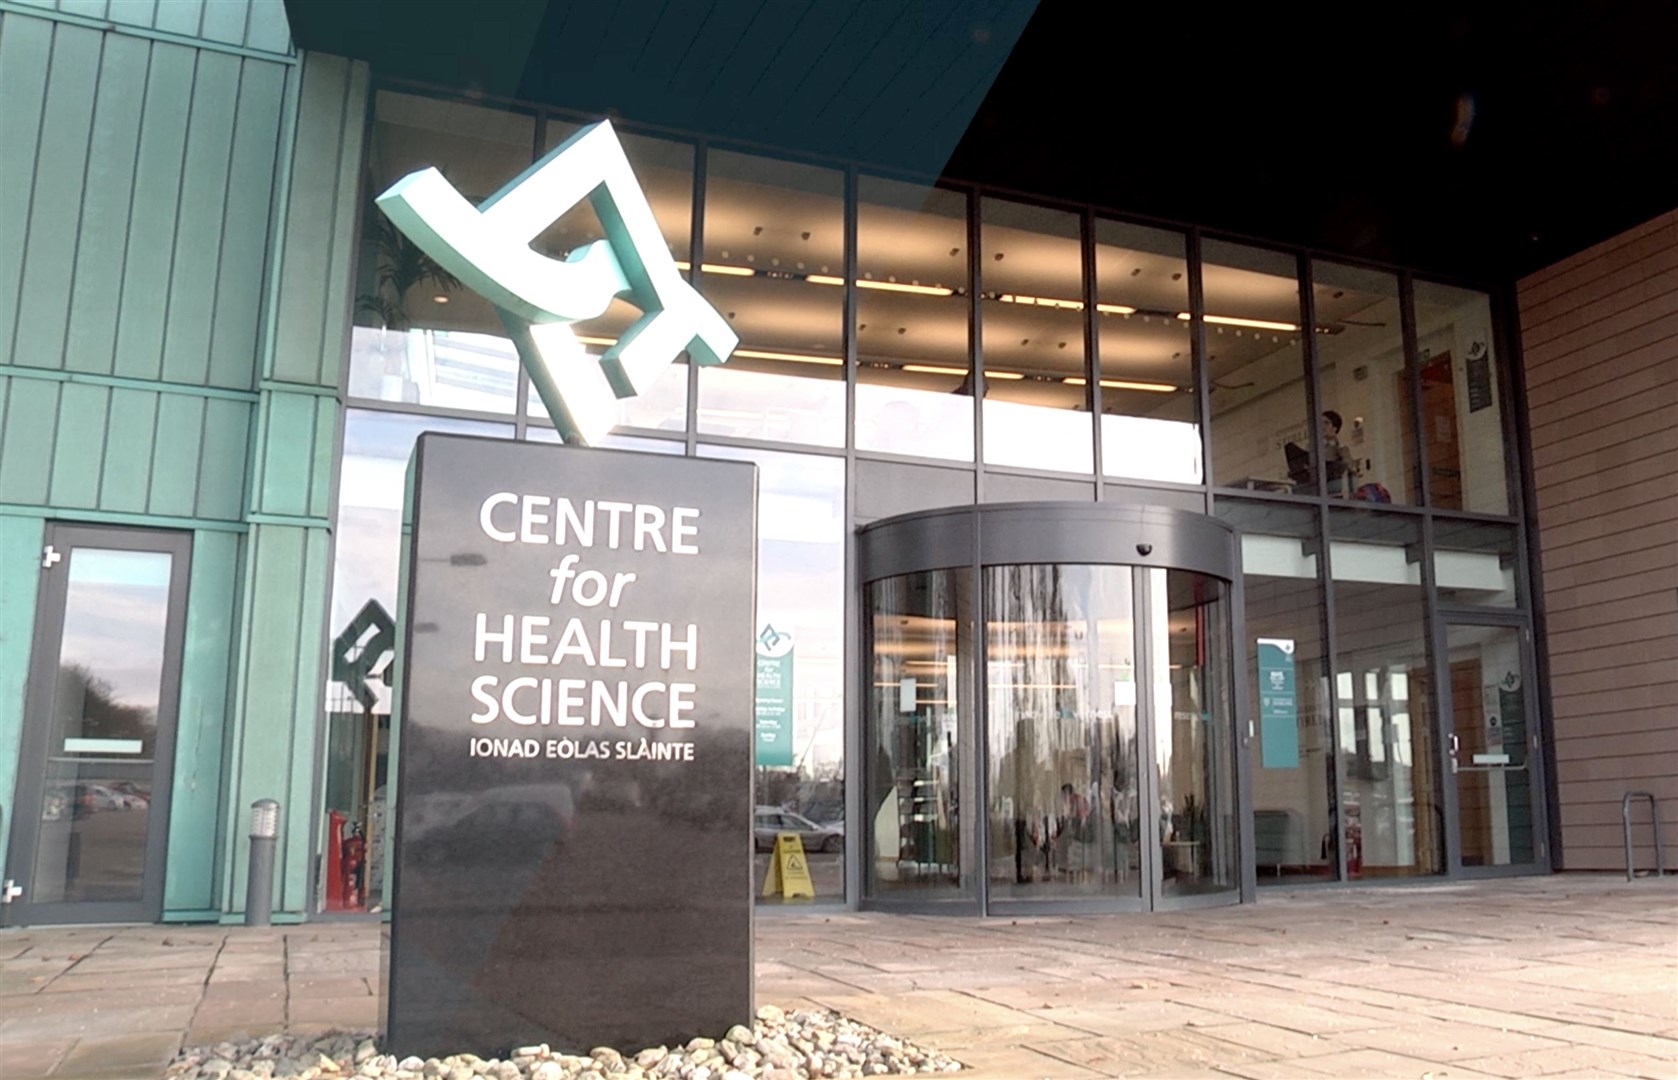 The Centre for Health Science is located not far from Raigmore Hospital in Inverness.